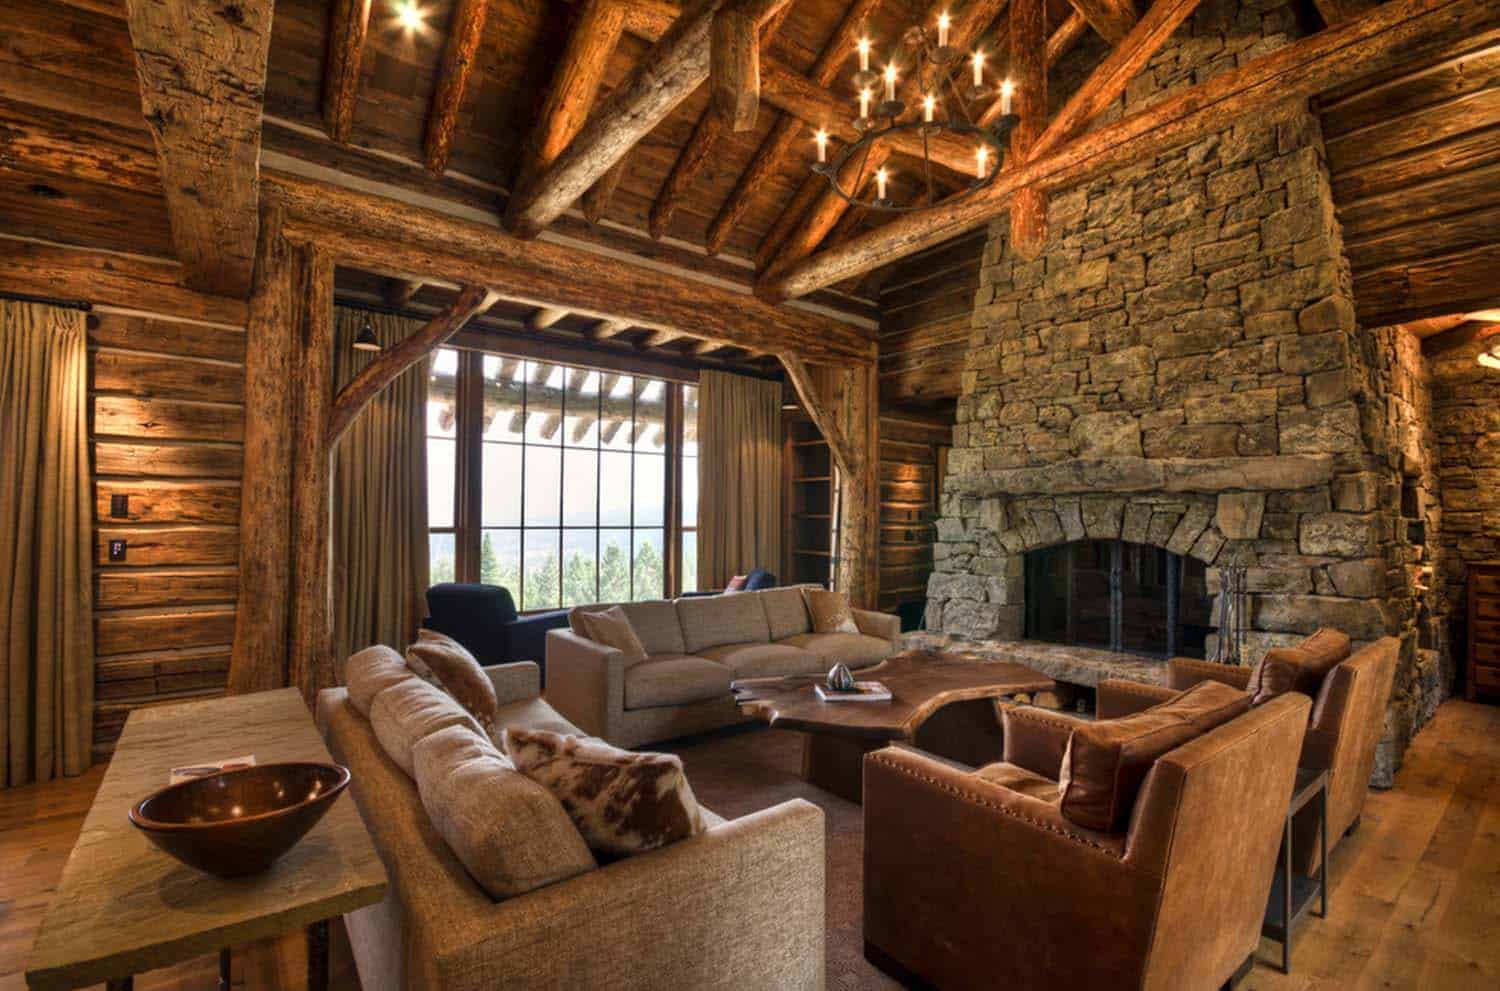 Mountain home surrounded by forest offers rustic living in Montana